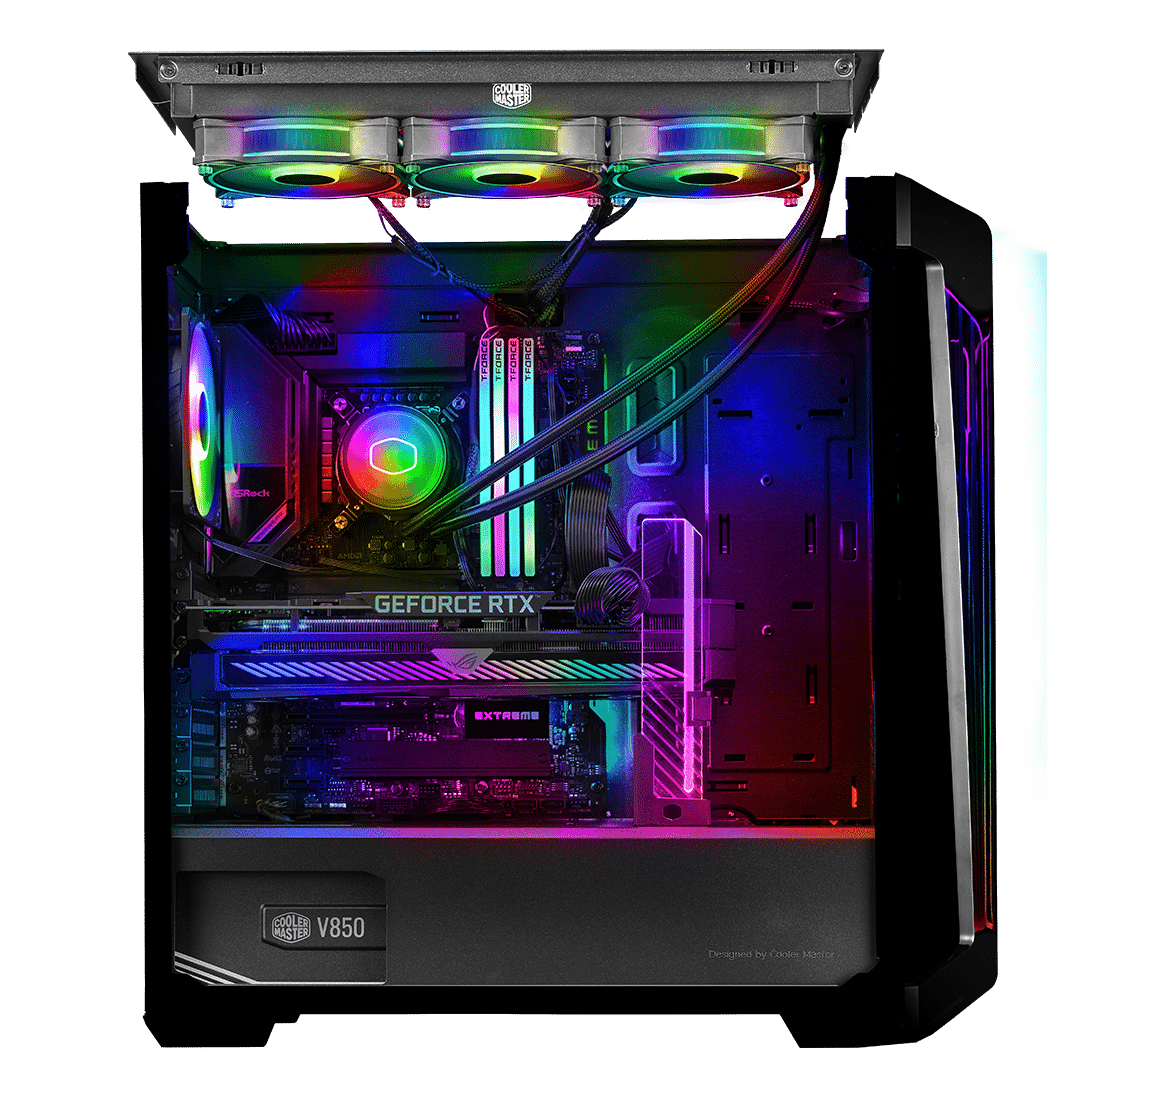 Cooler Master presents two new cases: MasterBox 540 and MB600L V2